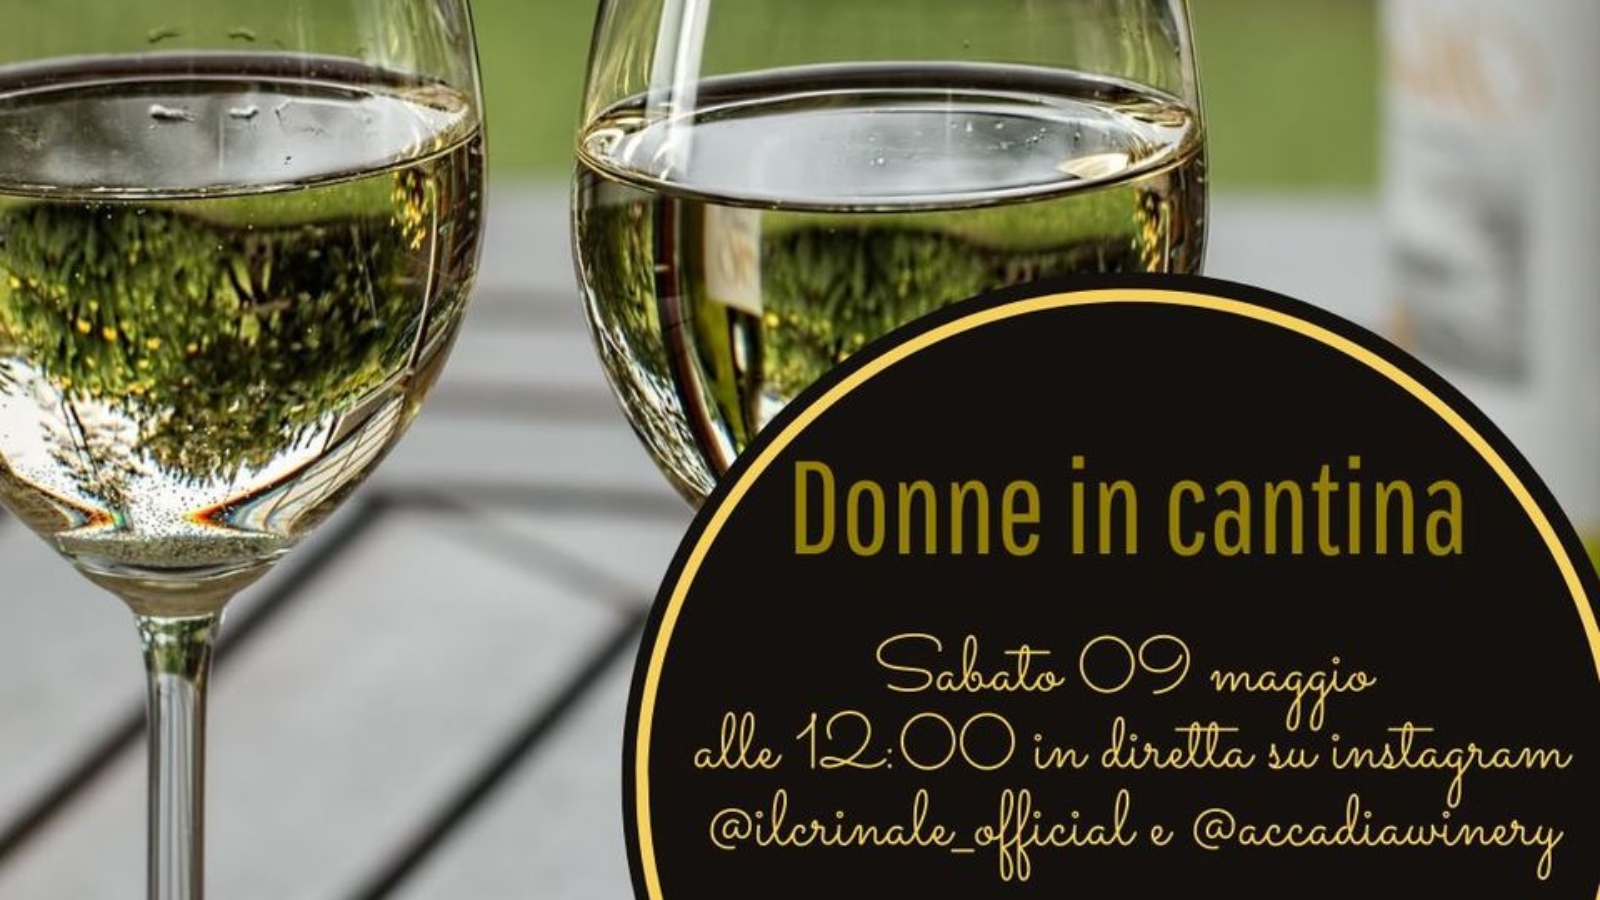 Donne in cantina